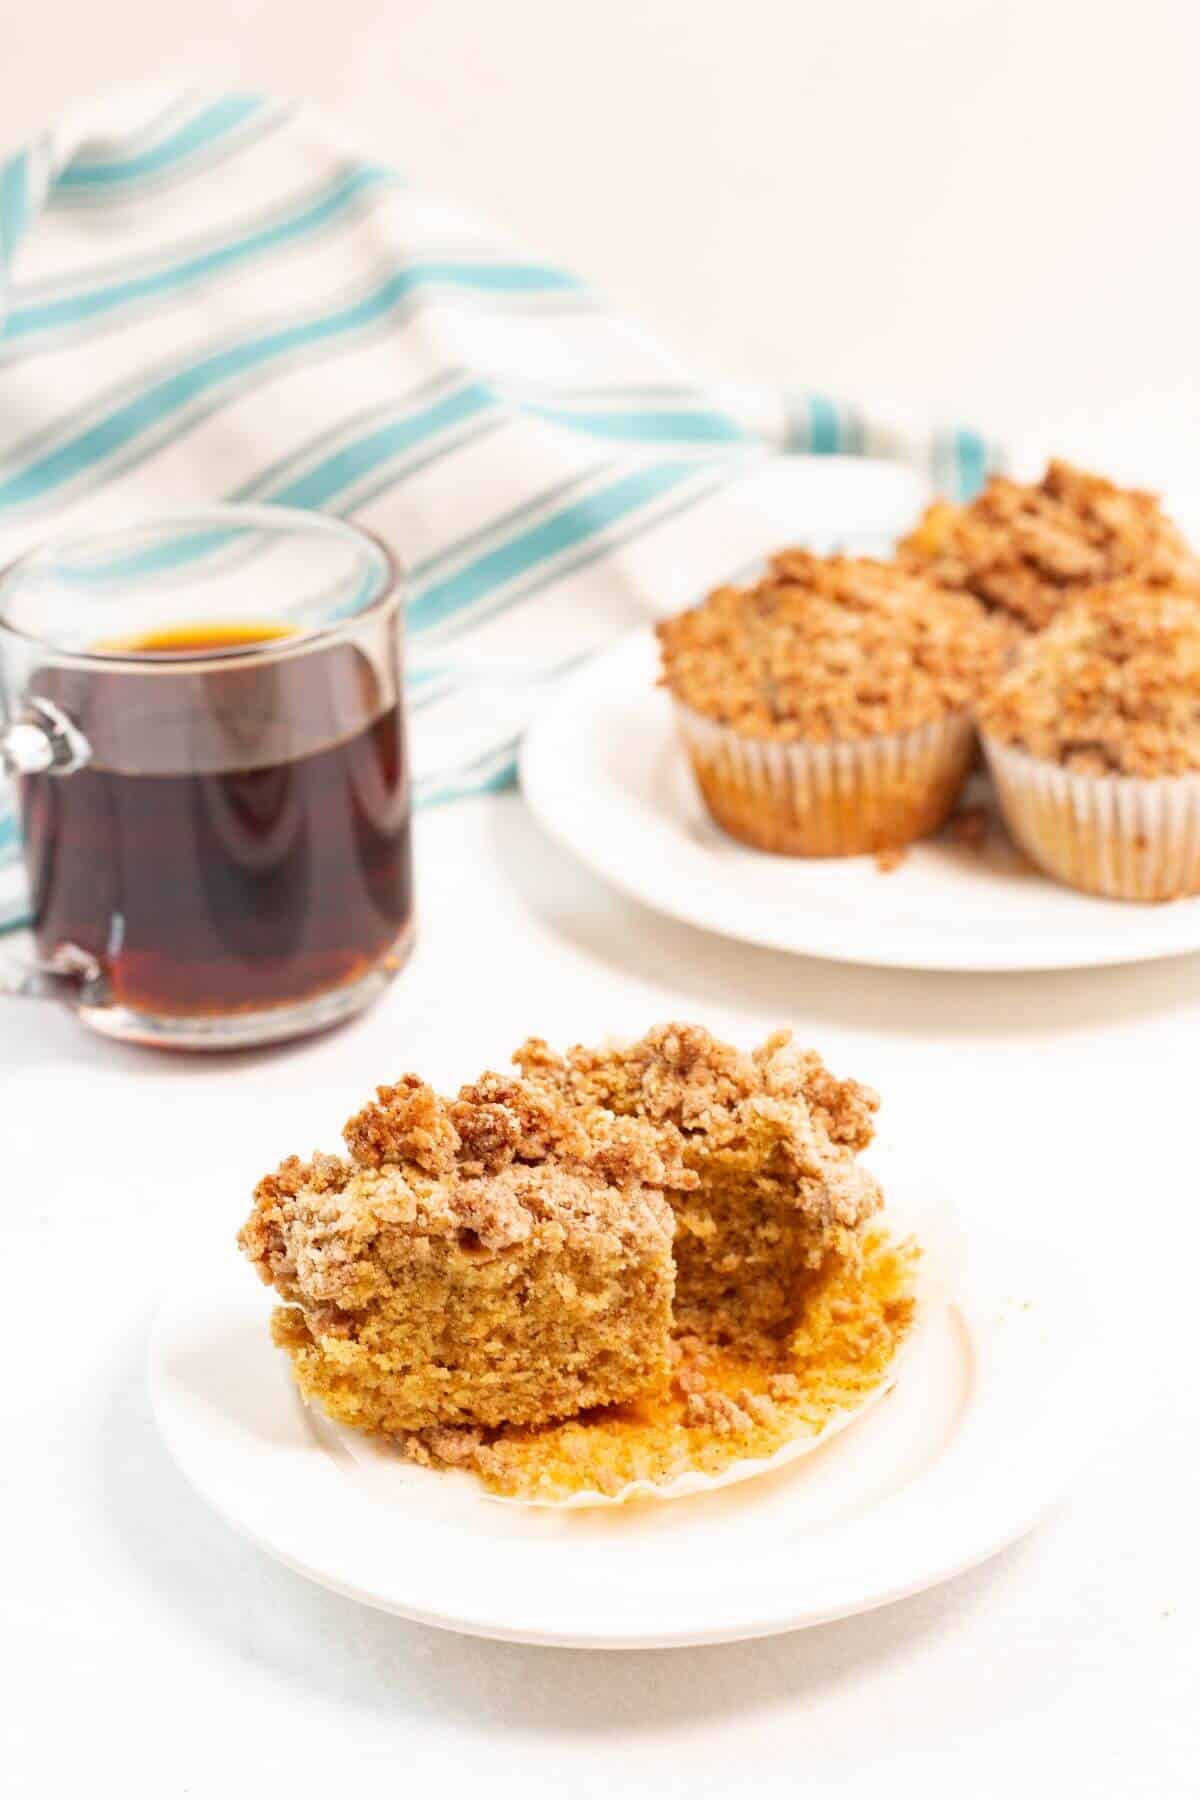 Coffee cake muffin sliced in half on plate with coffee.